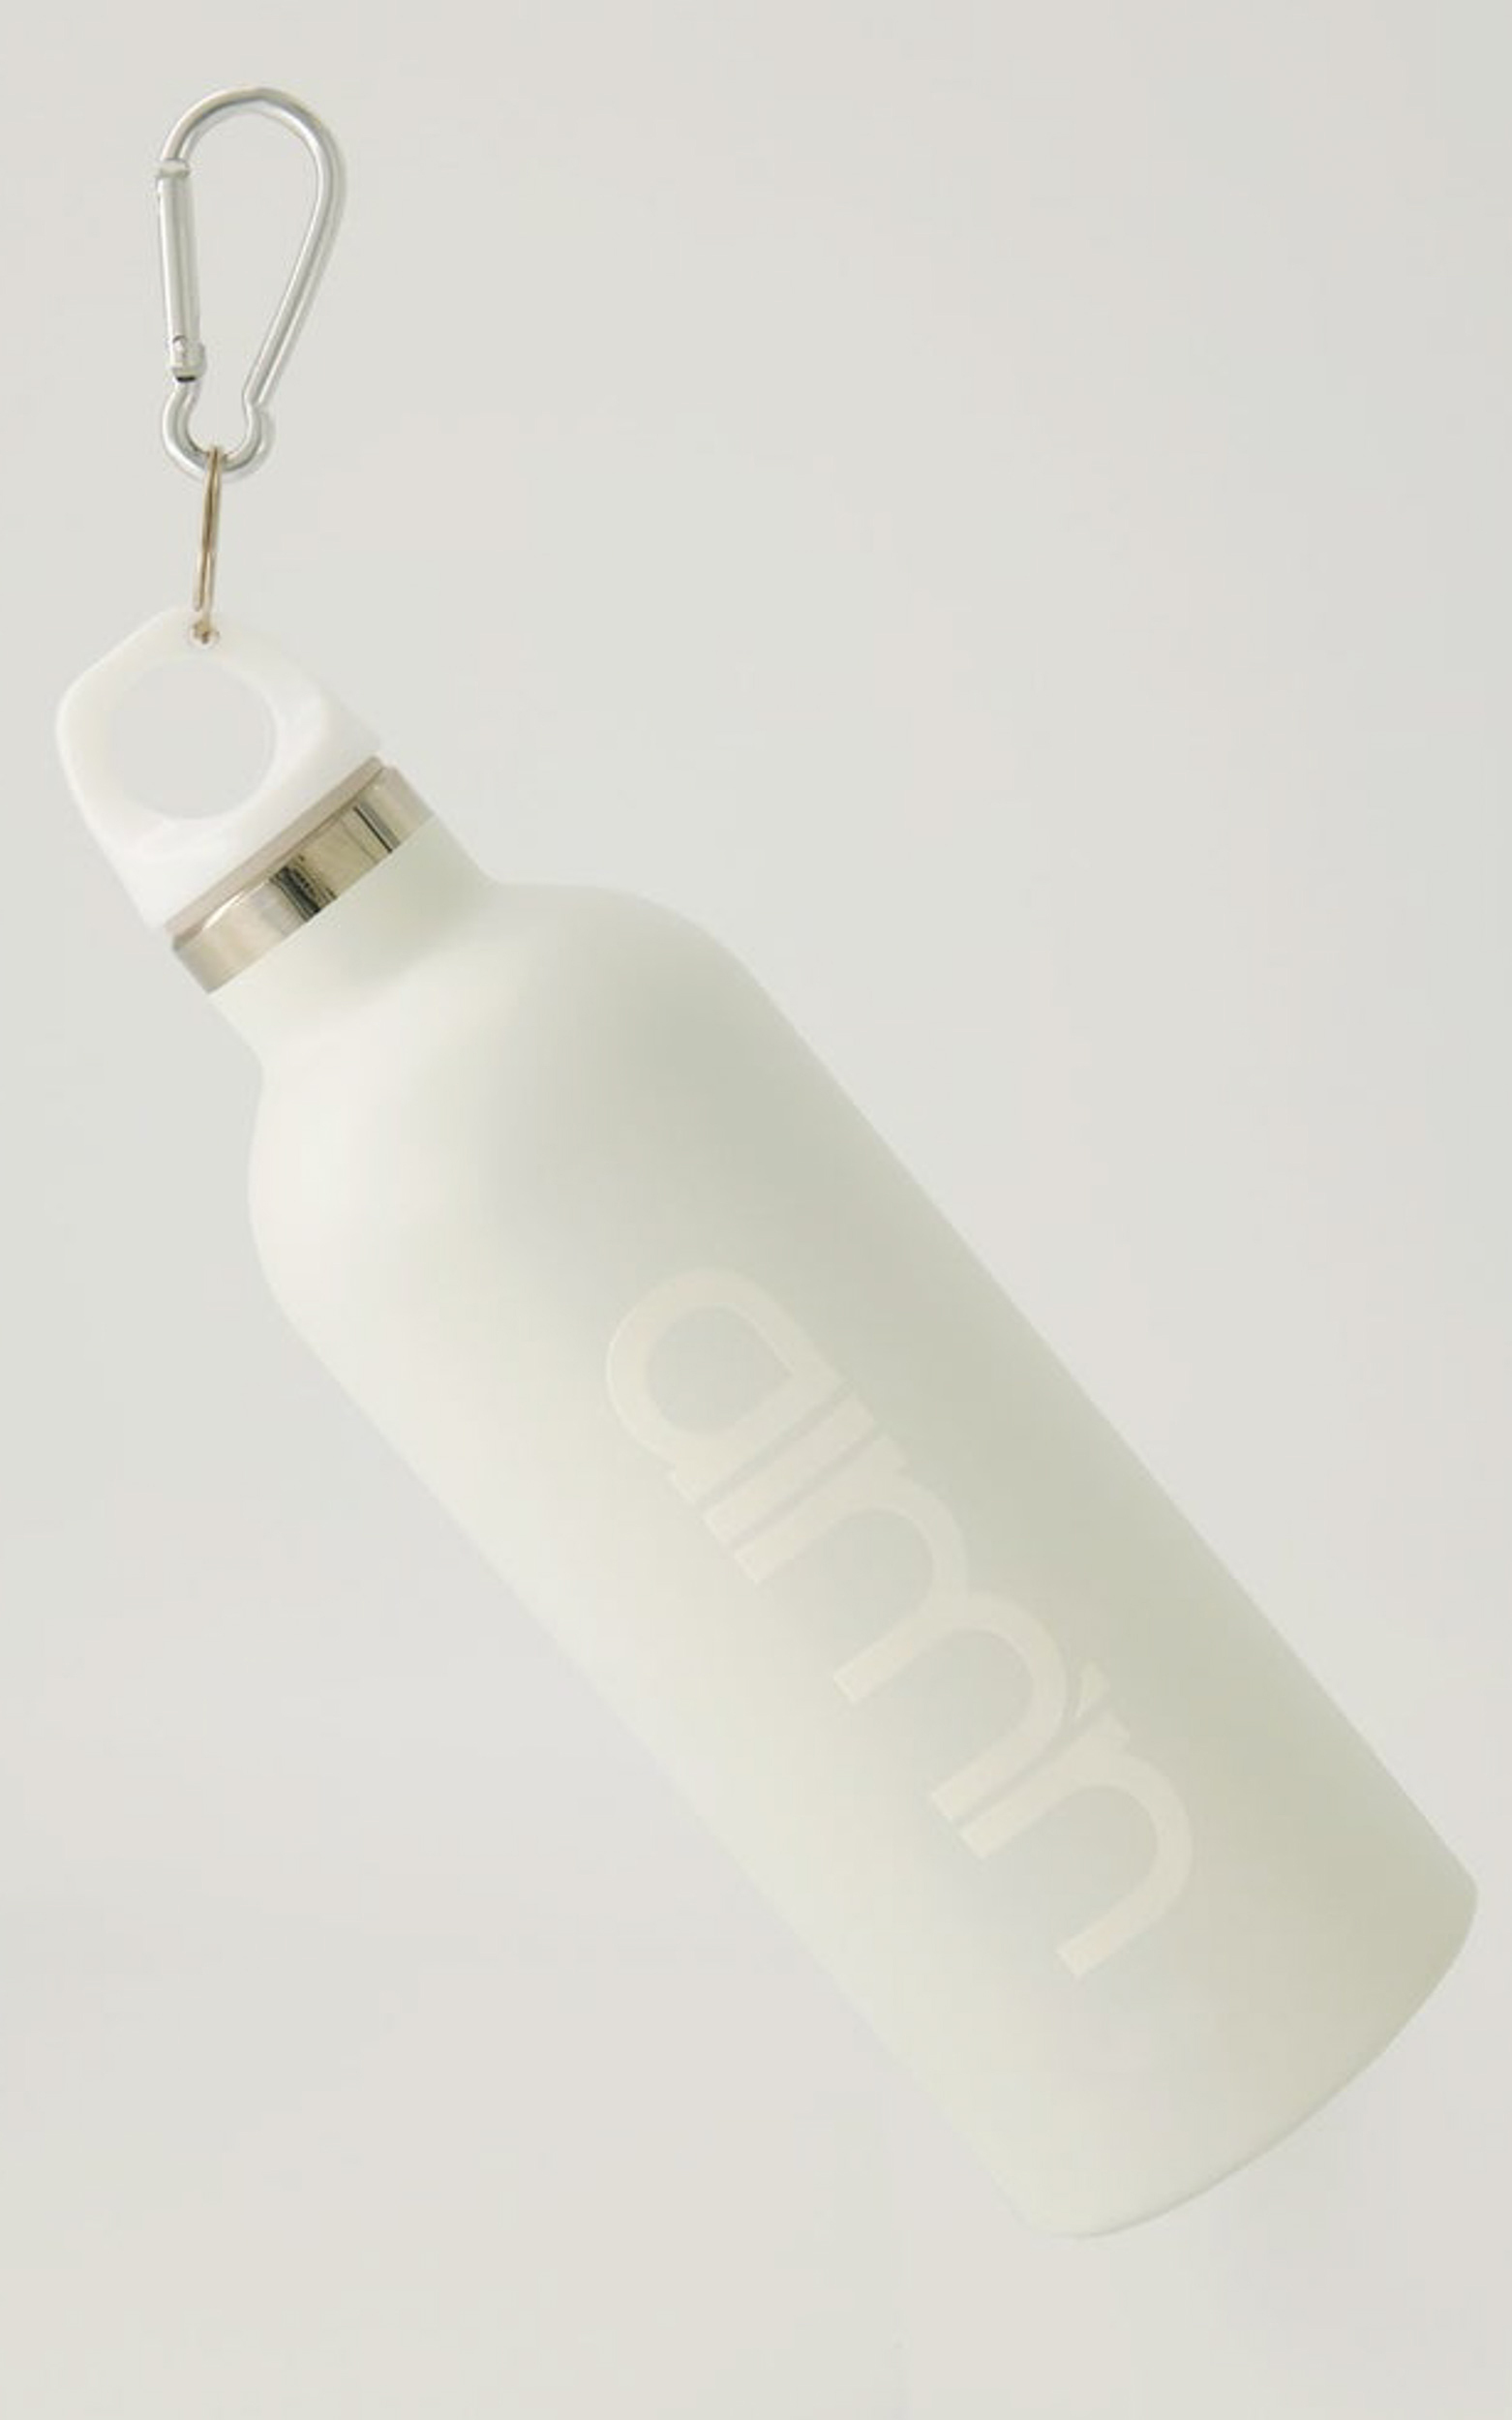 Aim'n - Hydrate Water Bottle in White - NoSize, WHT1, hi-res image number null